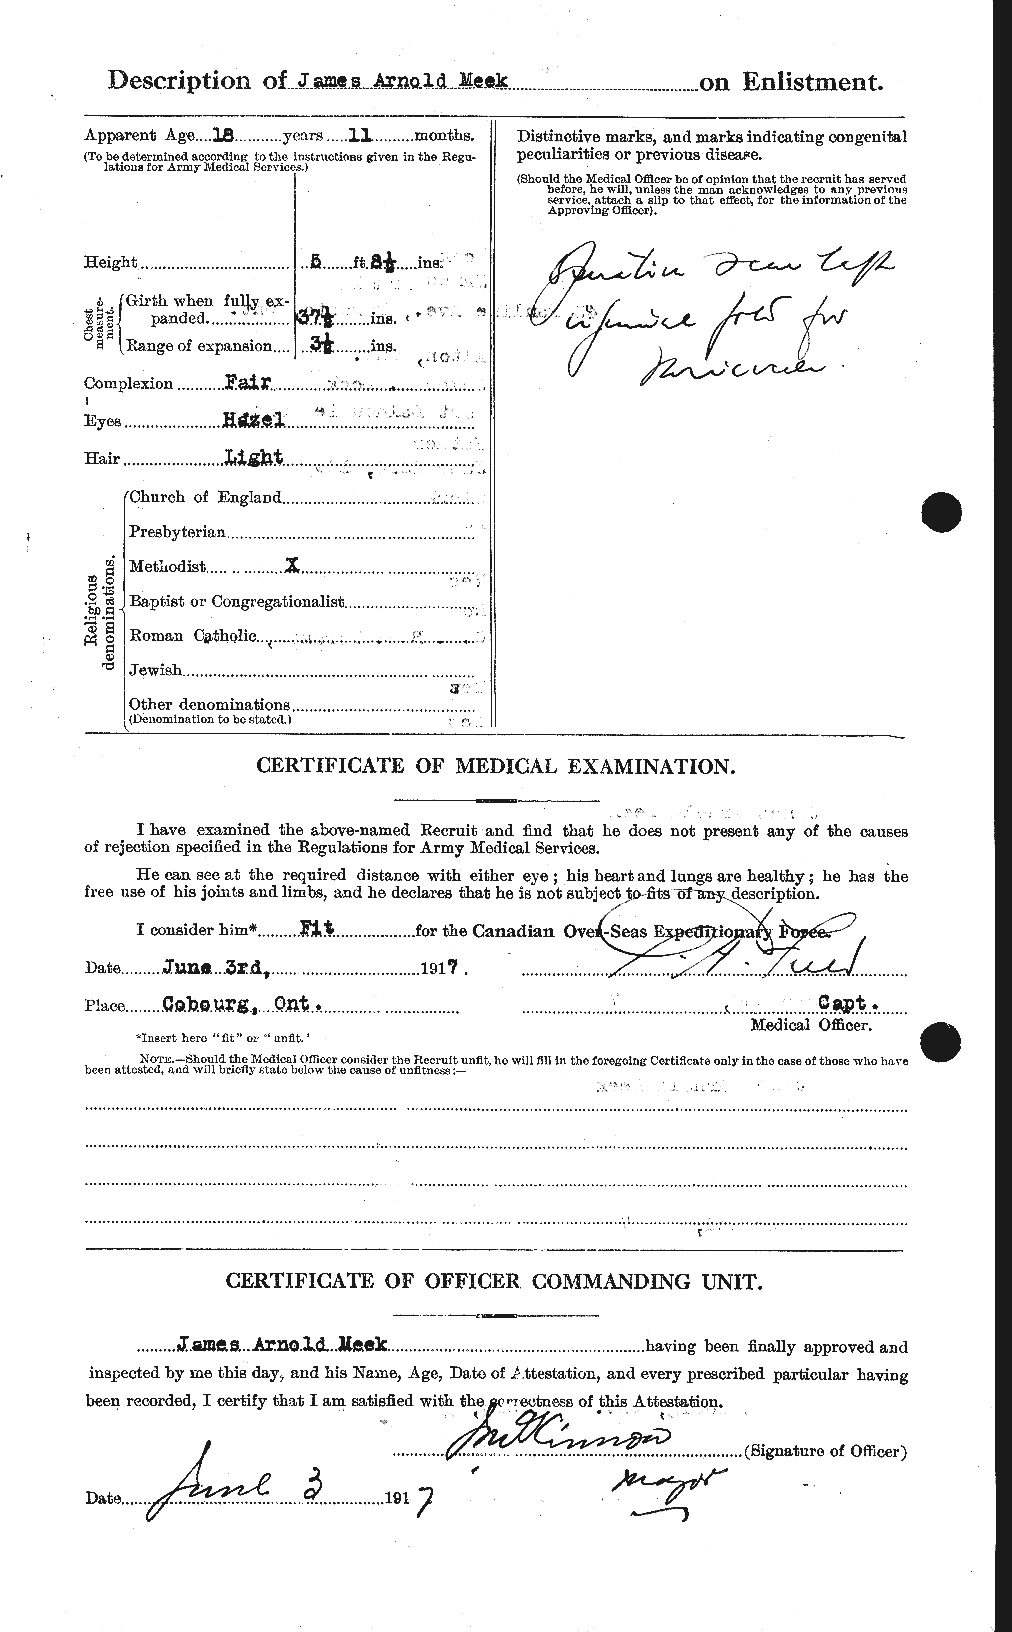 Personnel Records of the First World War - CEF 487681b